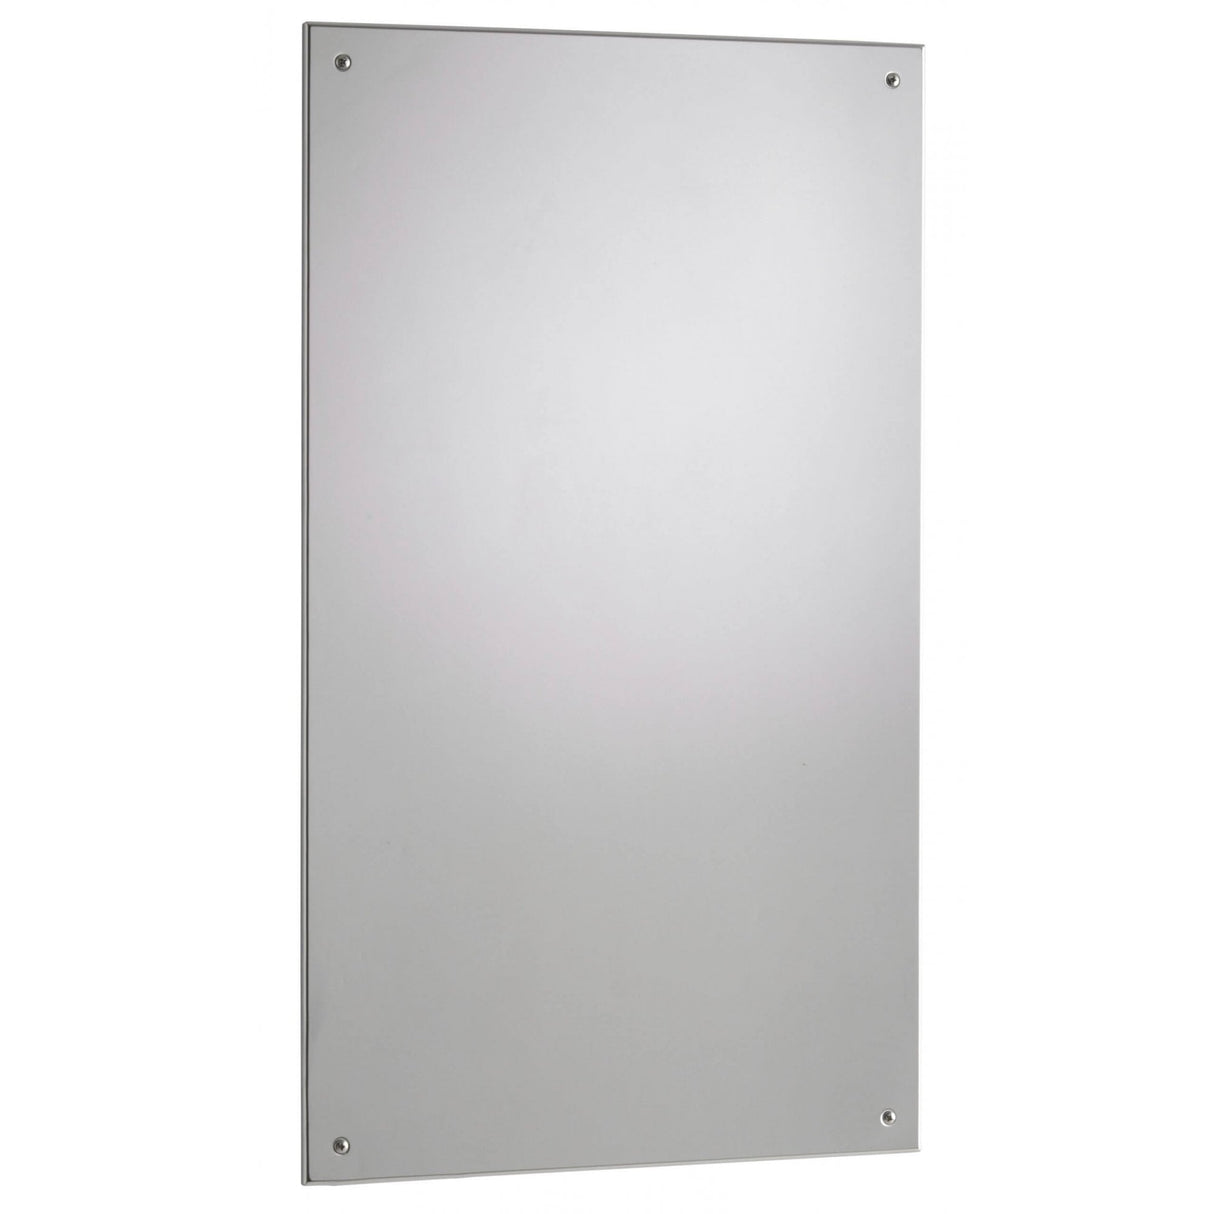 Unbreakable Frameless High Polished Stainless Steel Mirror B-1556_2436 (597x902x6)